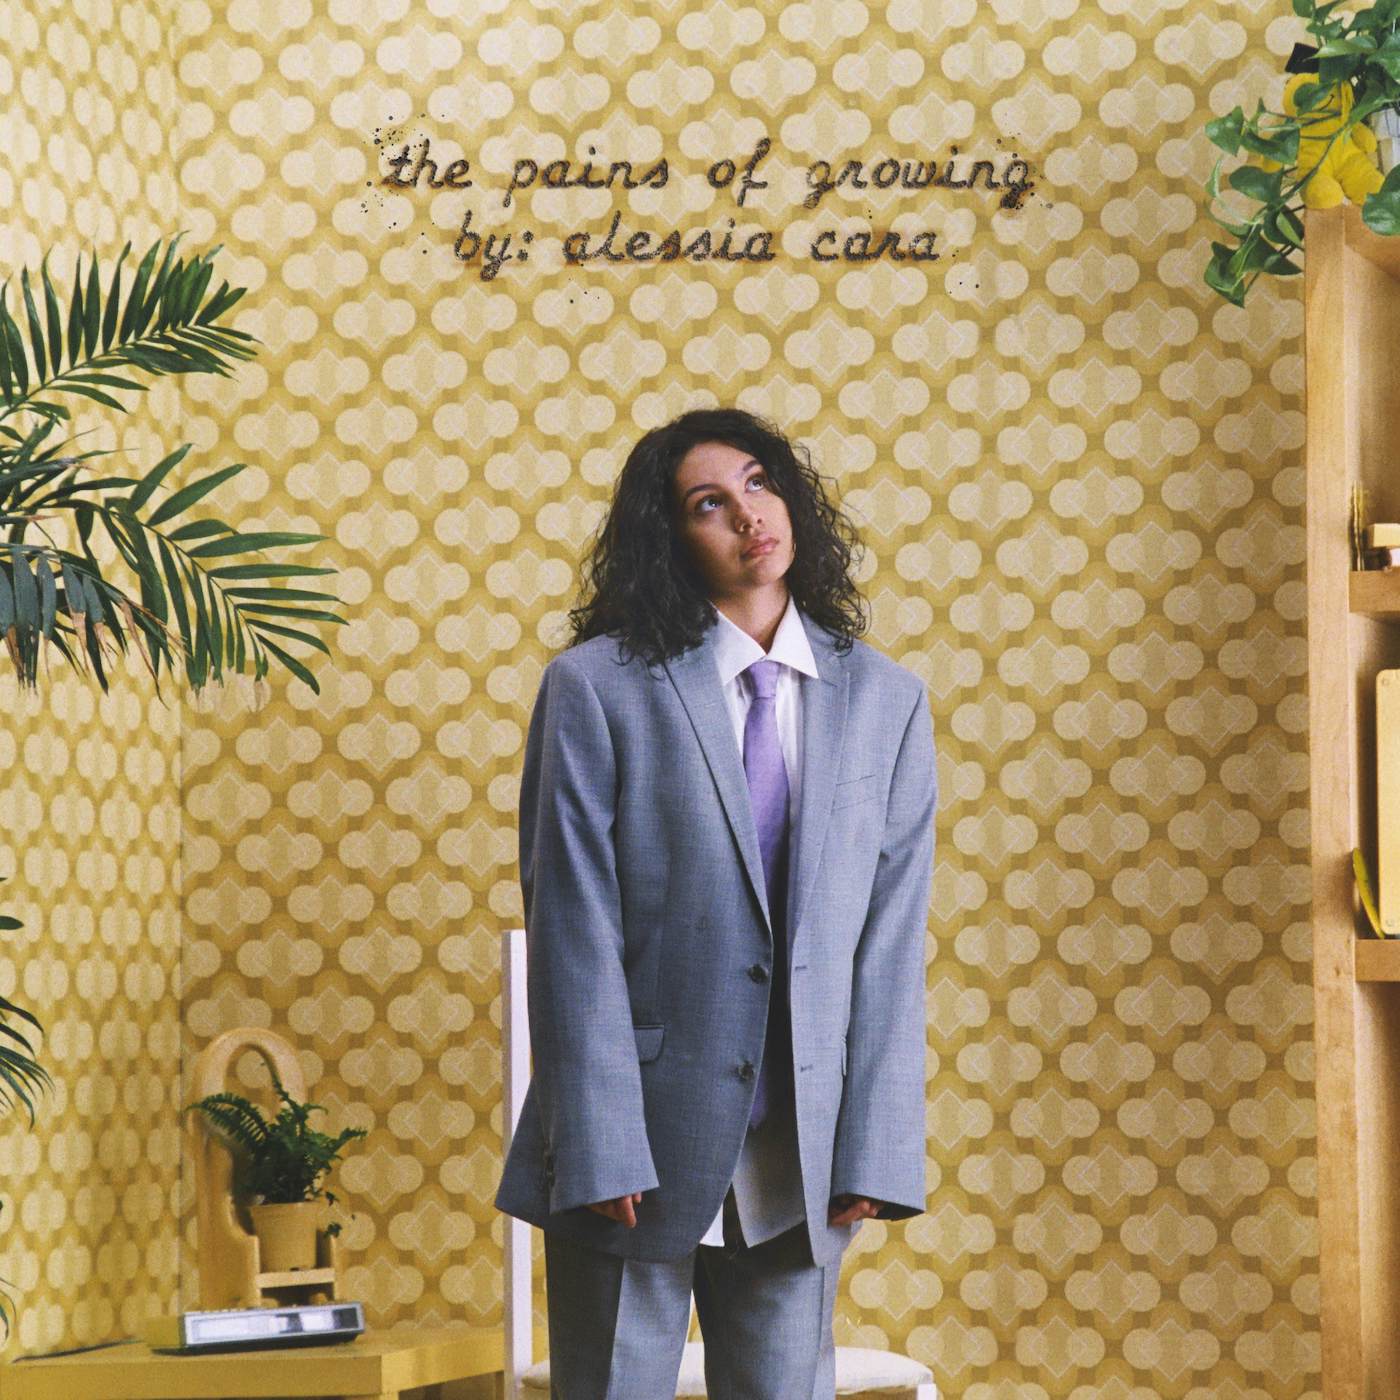 Alessia Cara PAINS OF GROWING CD